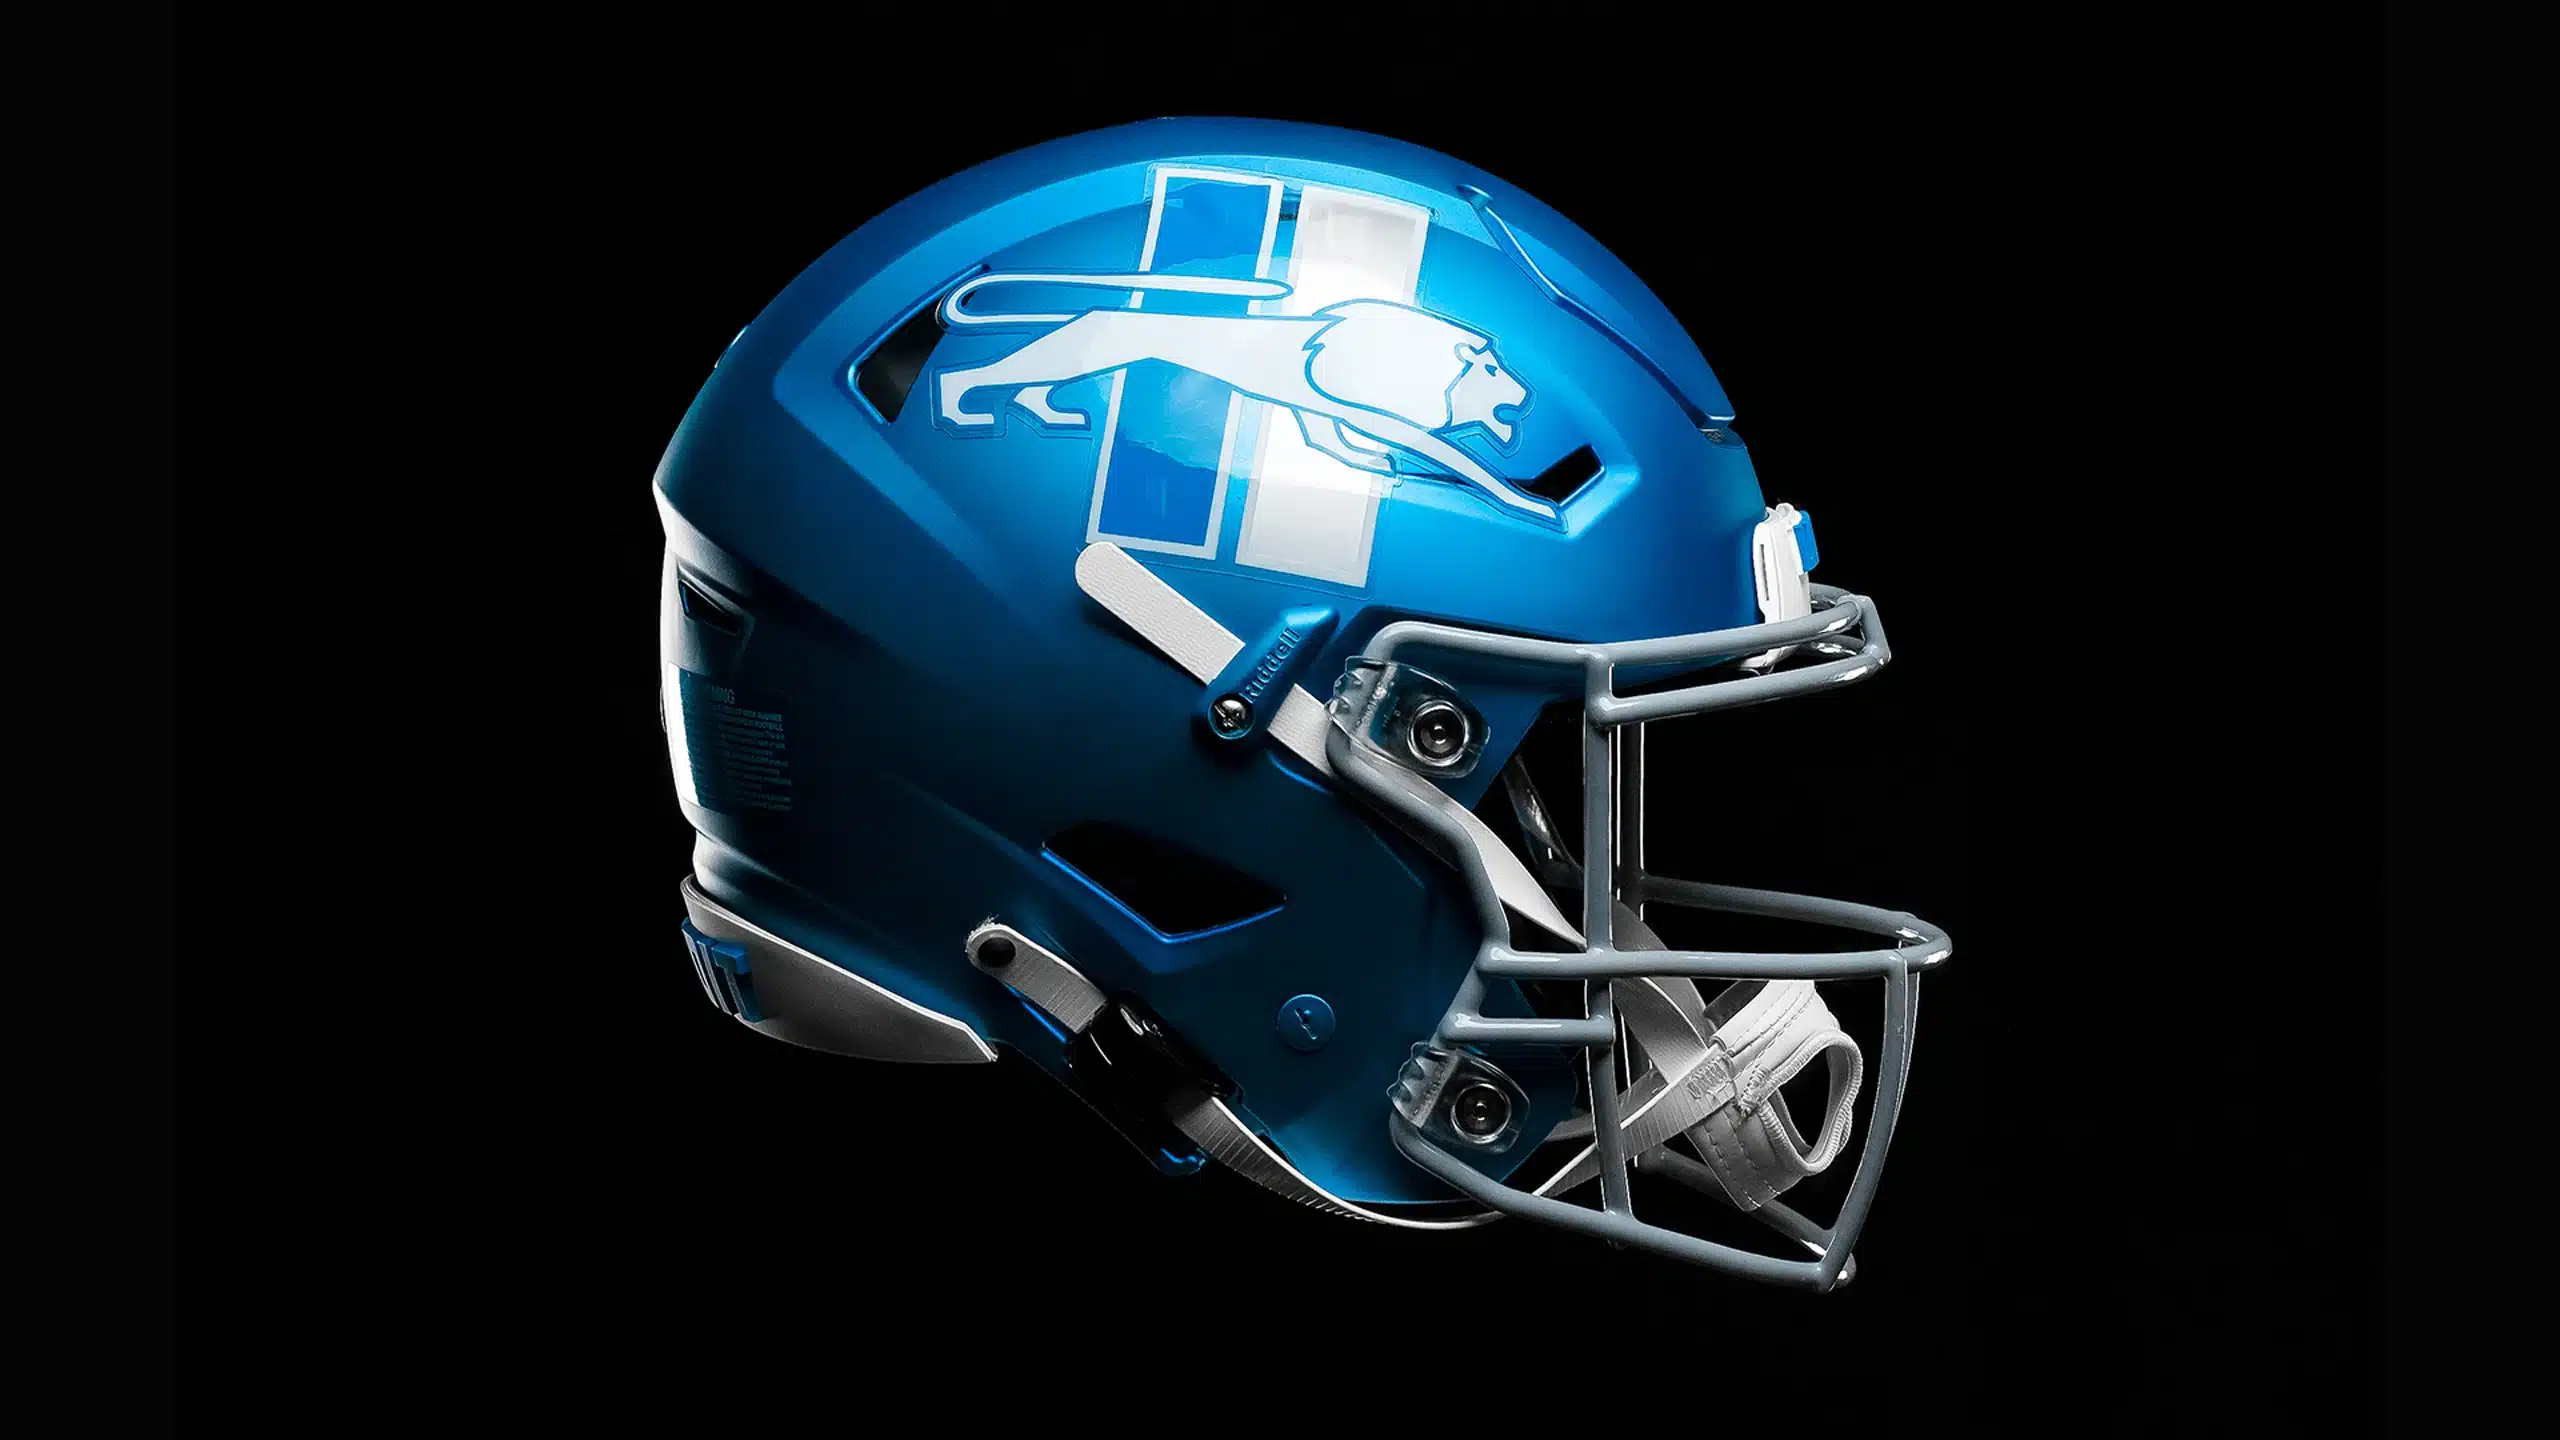 2023 Detroit Lions Alternate Helmet 2023 Detroit Lions Training Camp Brad Holmes Justin Jackson Dan Campbell C.J. Gardner Johnson 2023 Detroit Lions 53-man roster Shane Zylstra Dylan Drummond Avery Davis Bobby Hart Detroit Lions vs. New York Giants Detroit Lions to sign Jason Moore Detroit Lions Expand Gameday Radio Coverage for 2023 Detroit Lions change jersey numbers 2023 Detroit Lions Team Captains Lions' Win Benito Jones wearing questionable outfit blockbuster trade for Detroit Lions